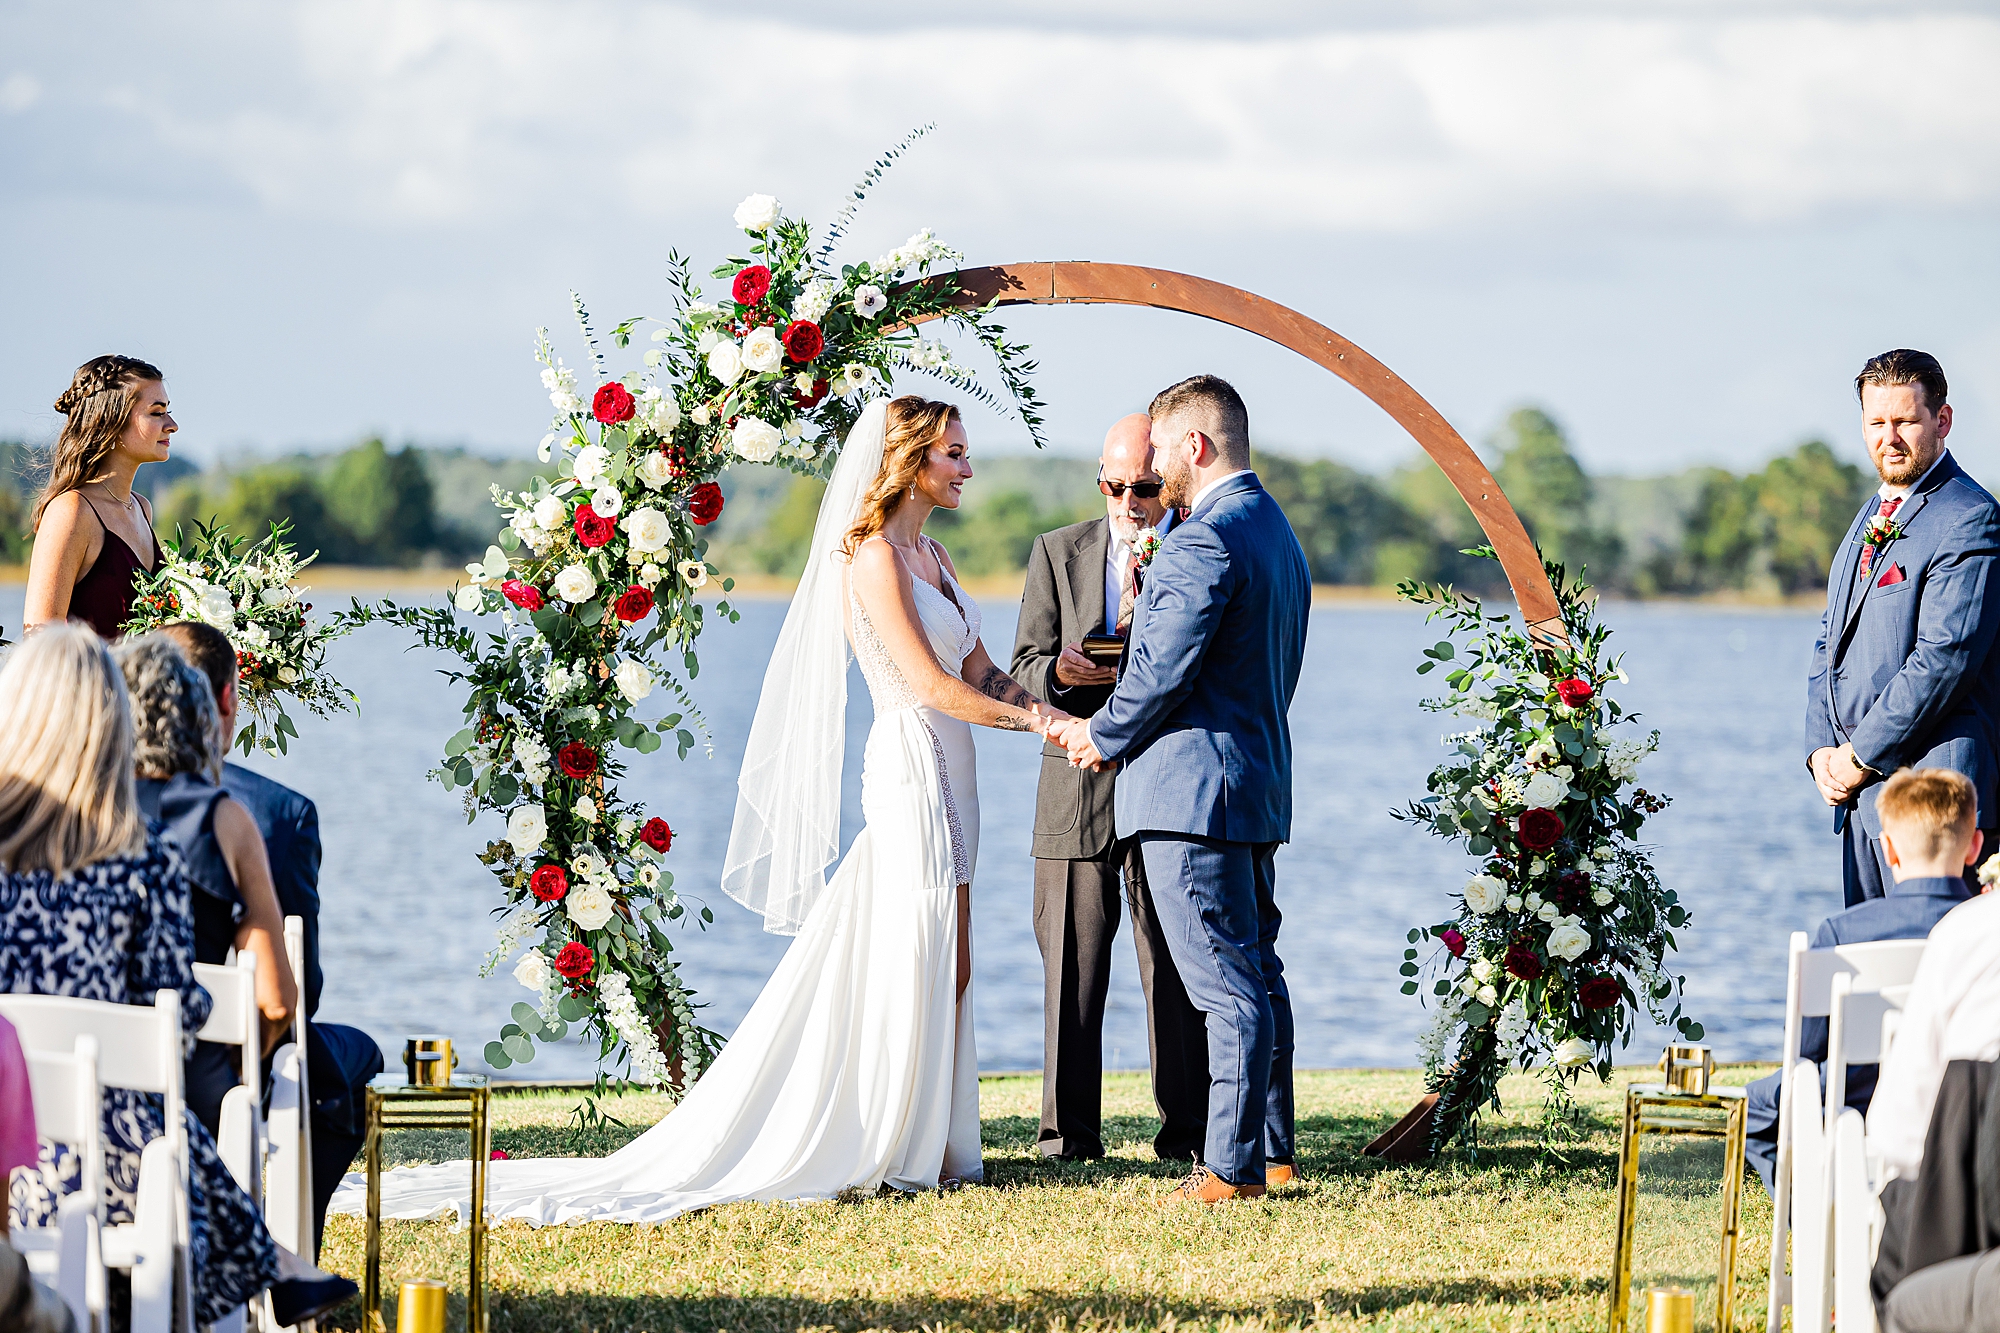 bride and groom exchange vows under wooden arbor with red and white flowers 